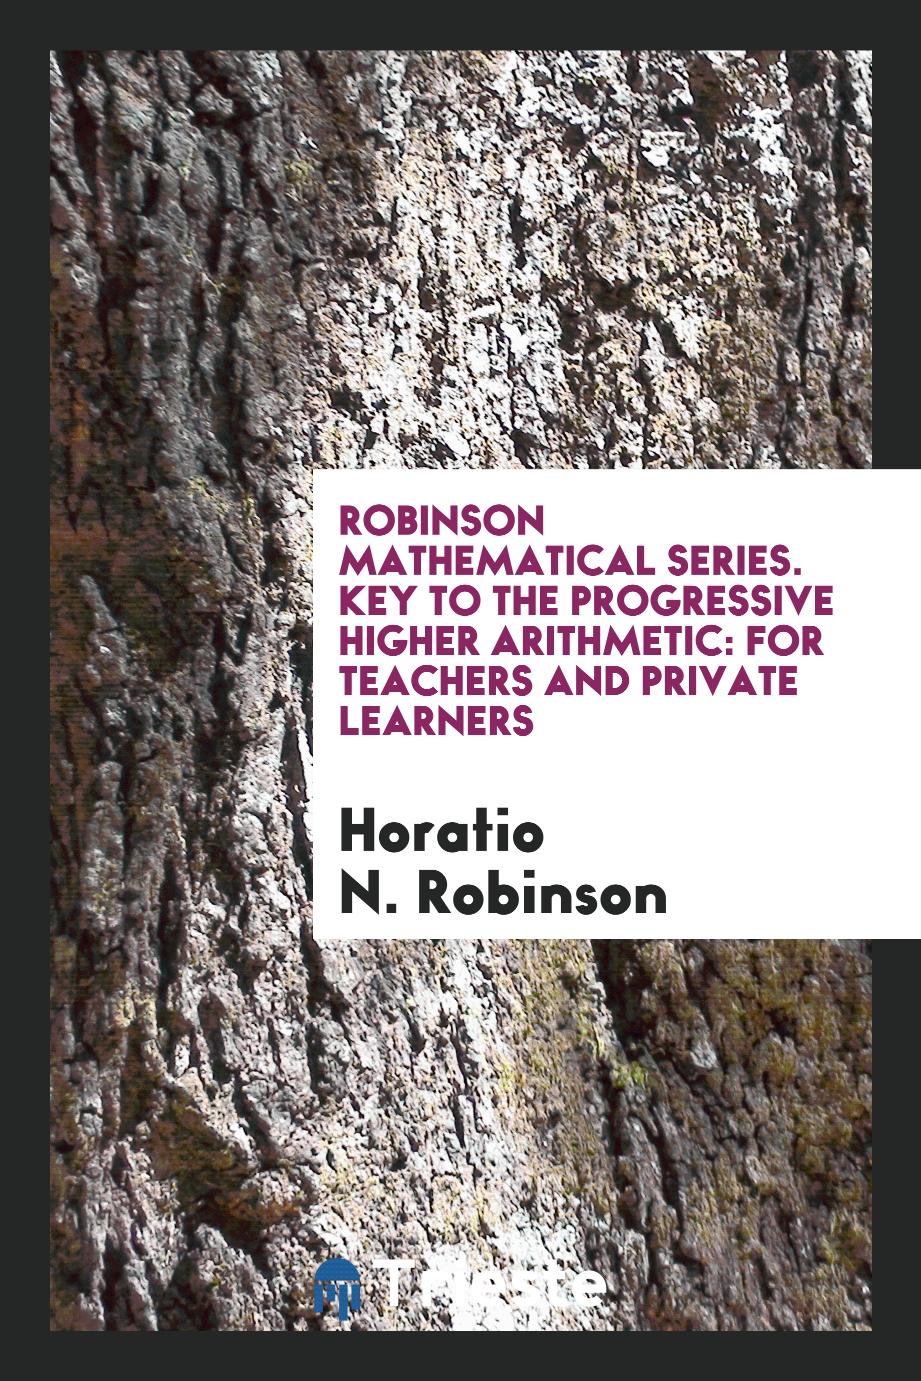 Robinson Mathematical Series. Key to the Progressive Higher Arithmetic: For Teachers and Private Learners